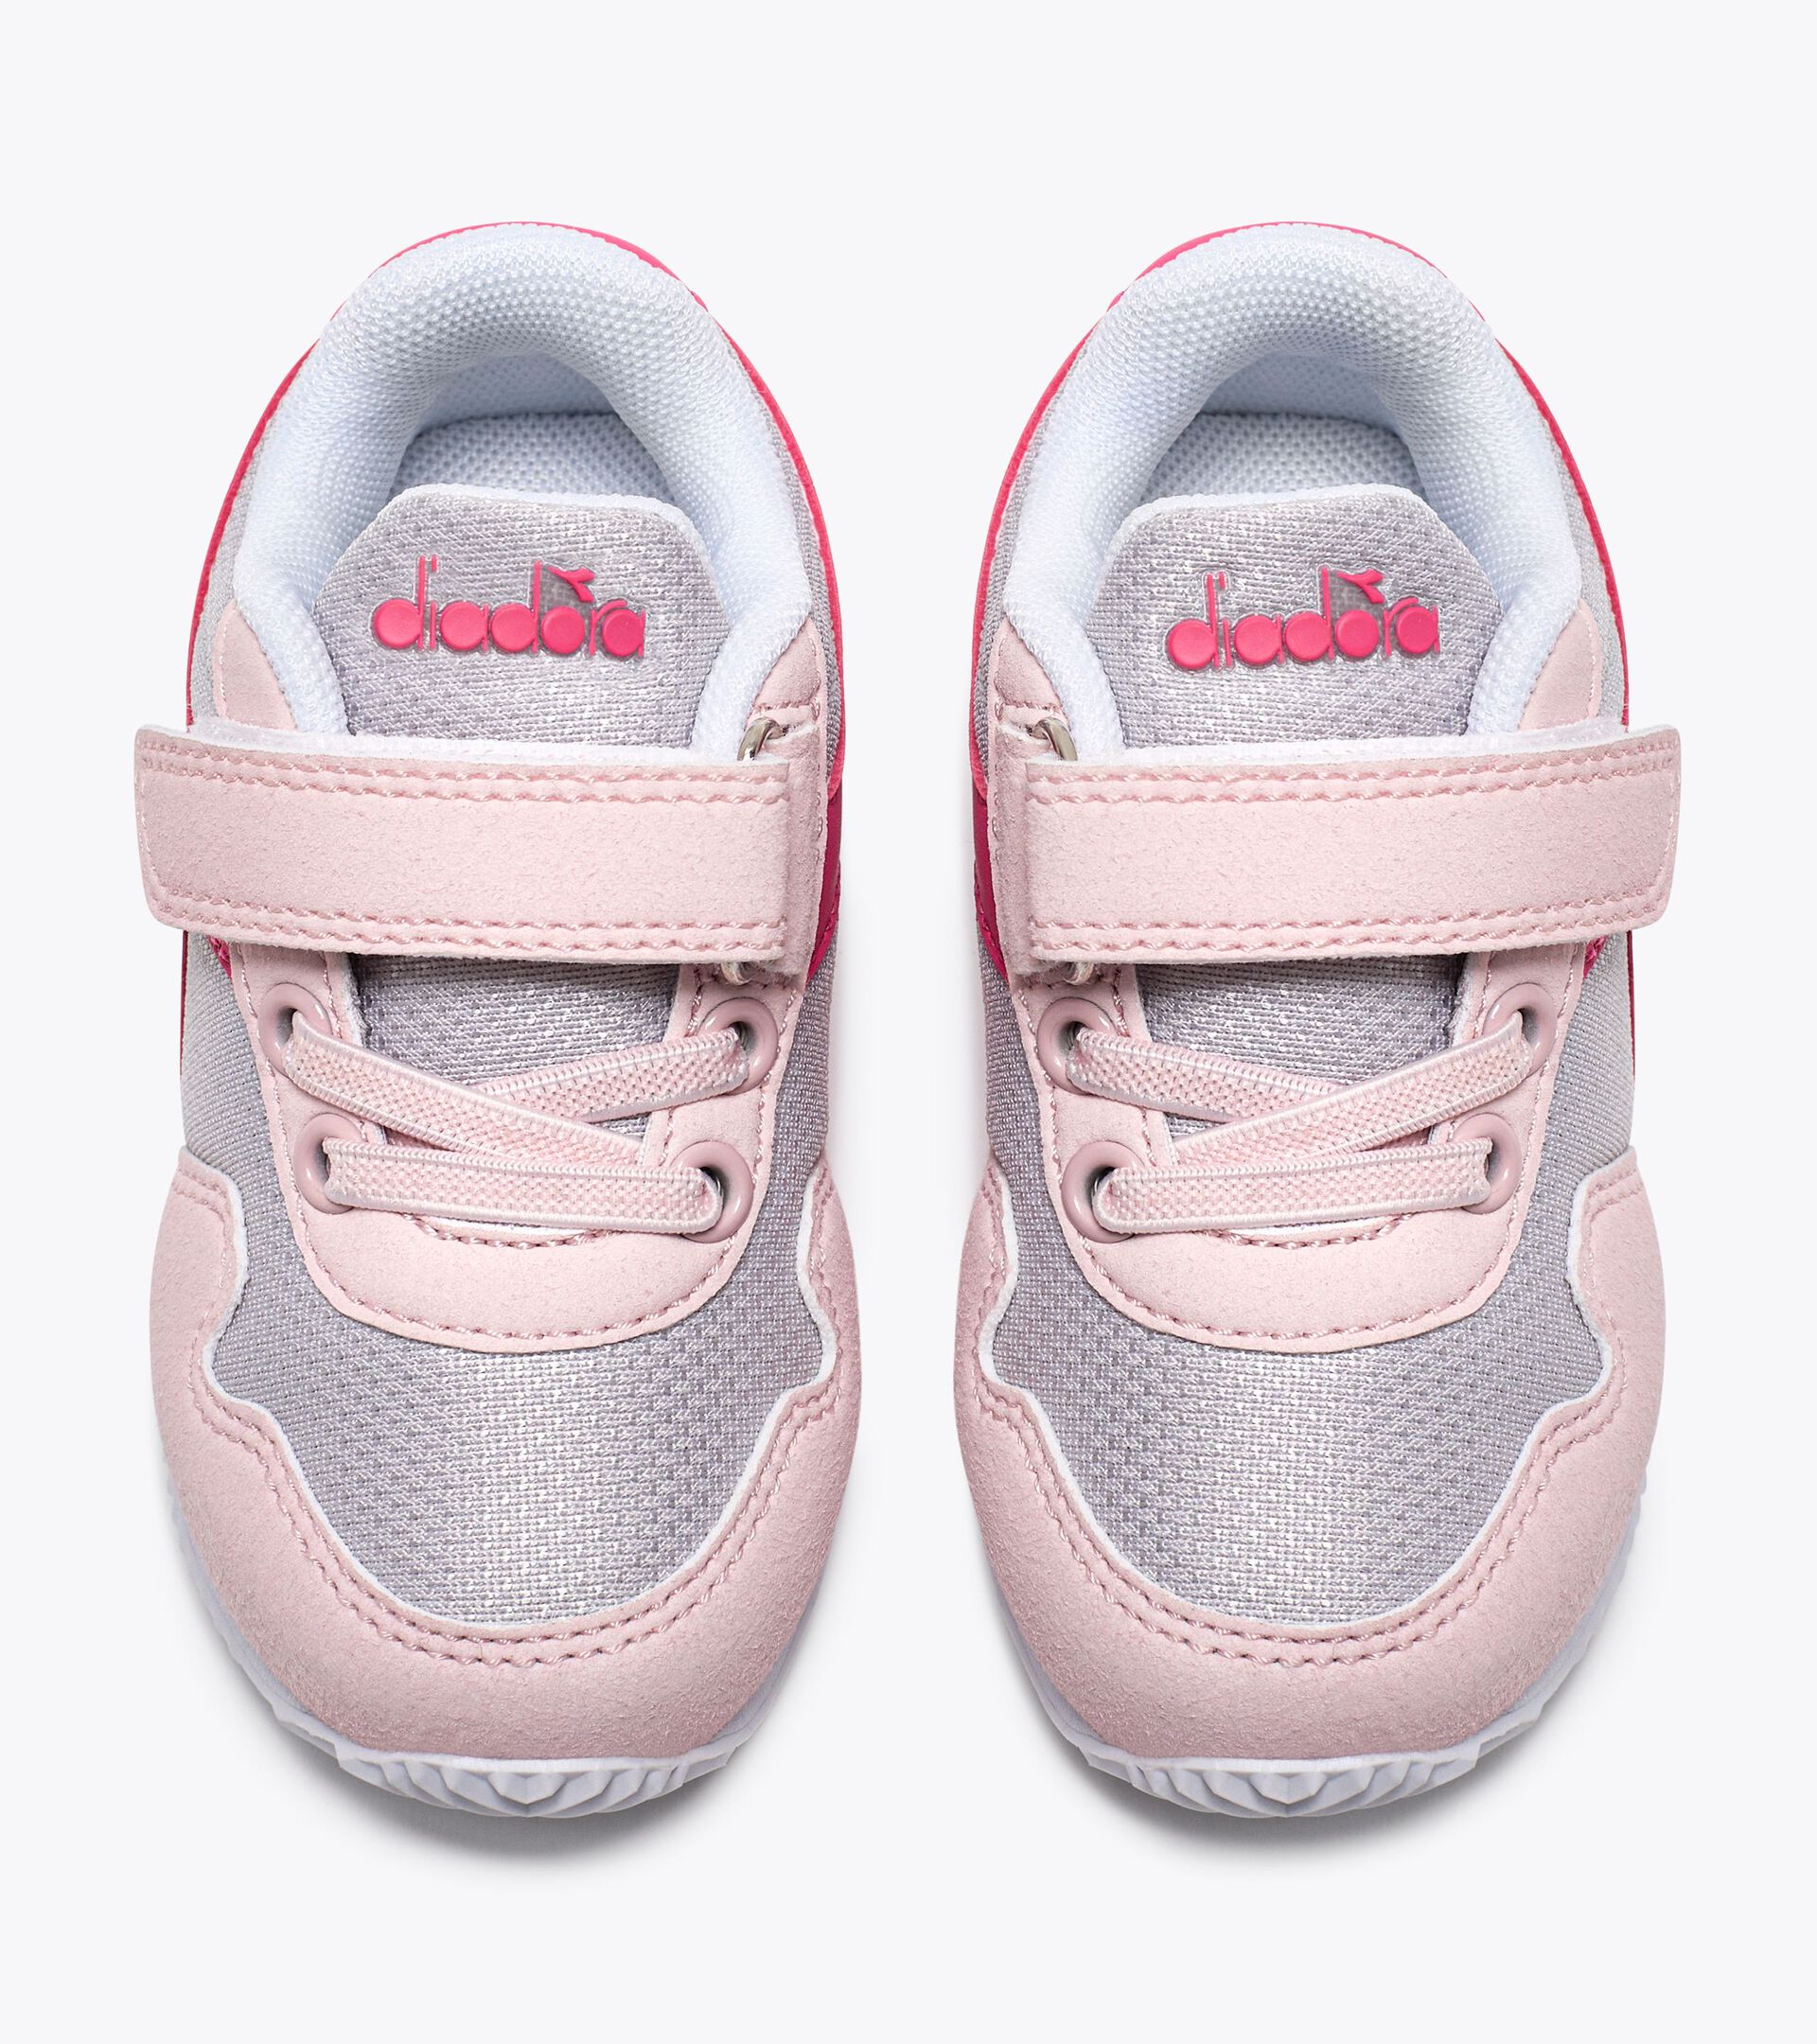 Sports shoes - Toddlers 1-4 years
 SIMPLE RUN TD PINK DOGWOOD/HOT PINK - Diadora